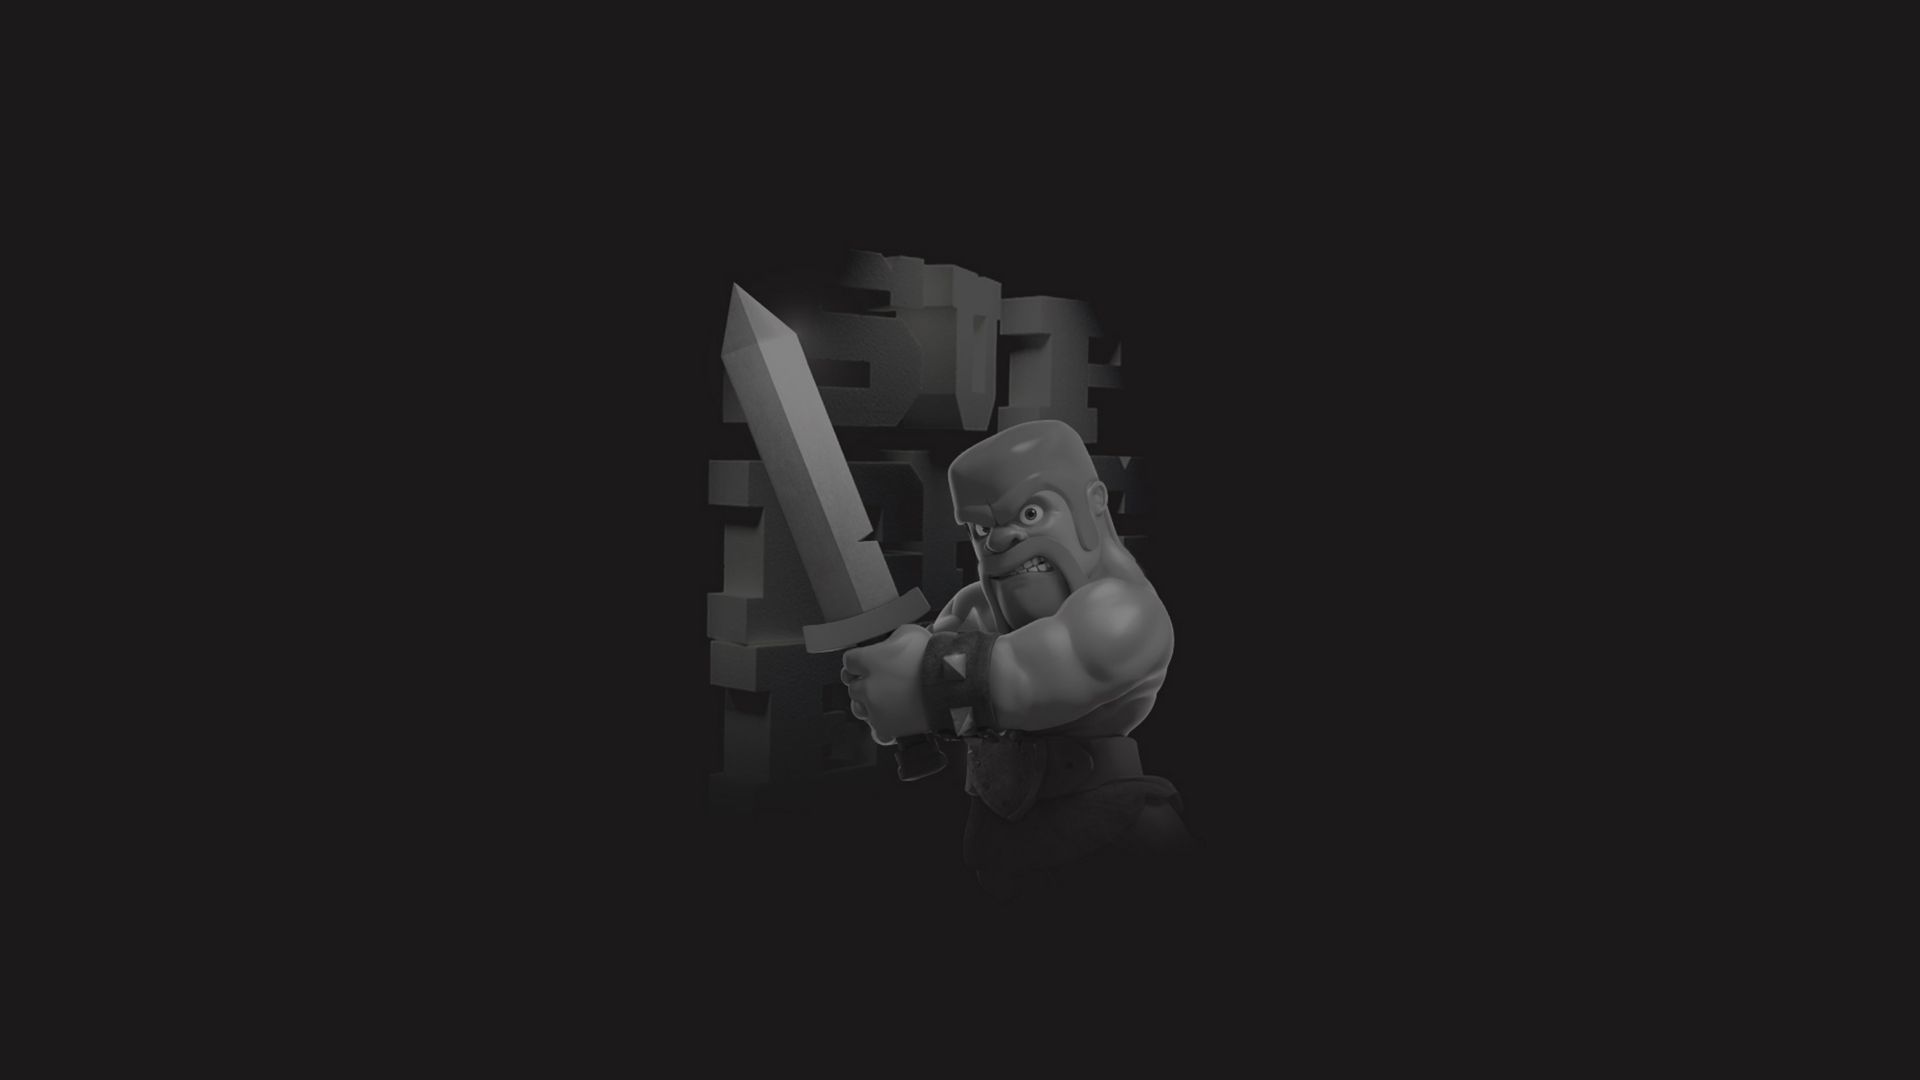 2560X1440 Clash Of Clans Wallpapers